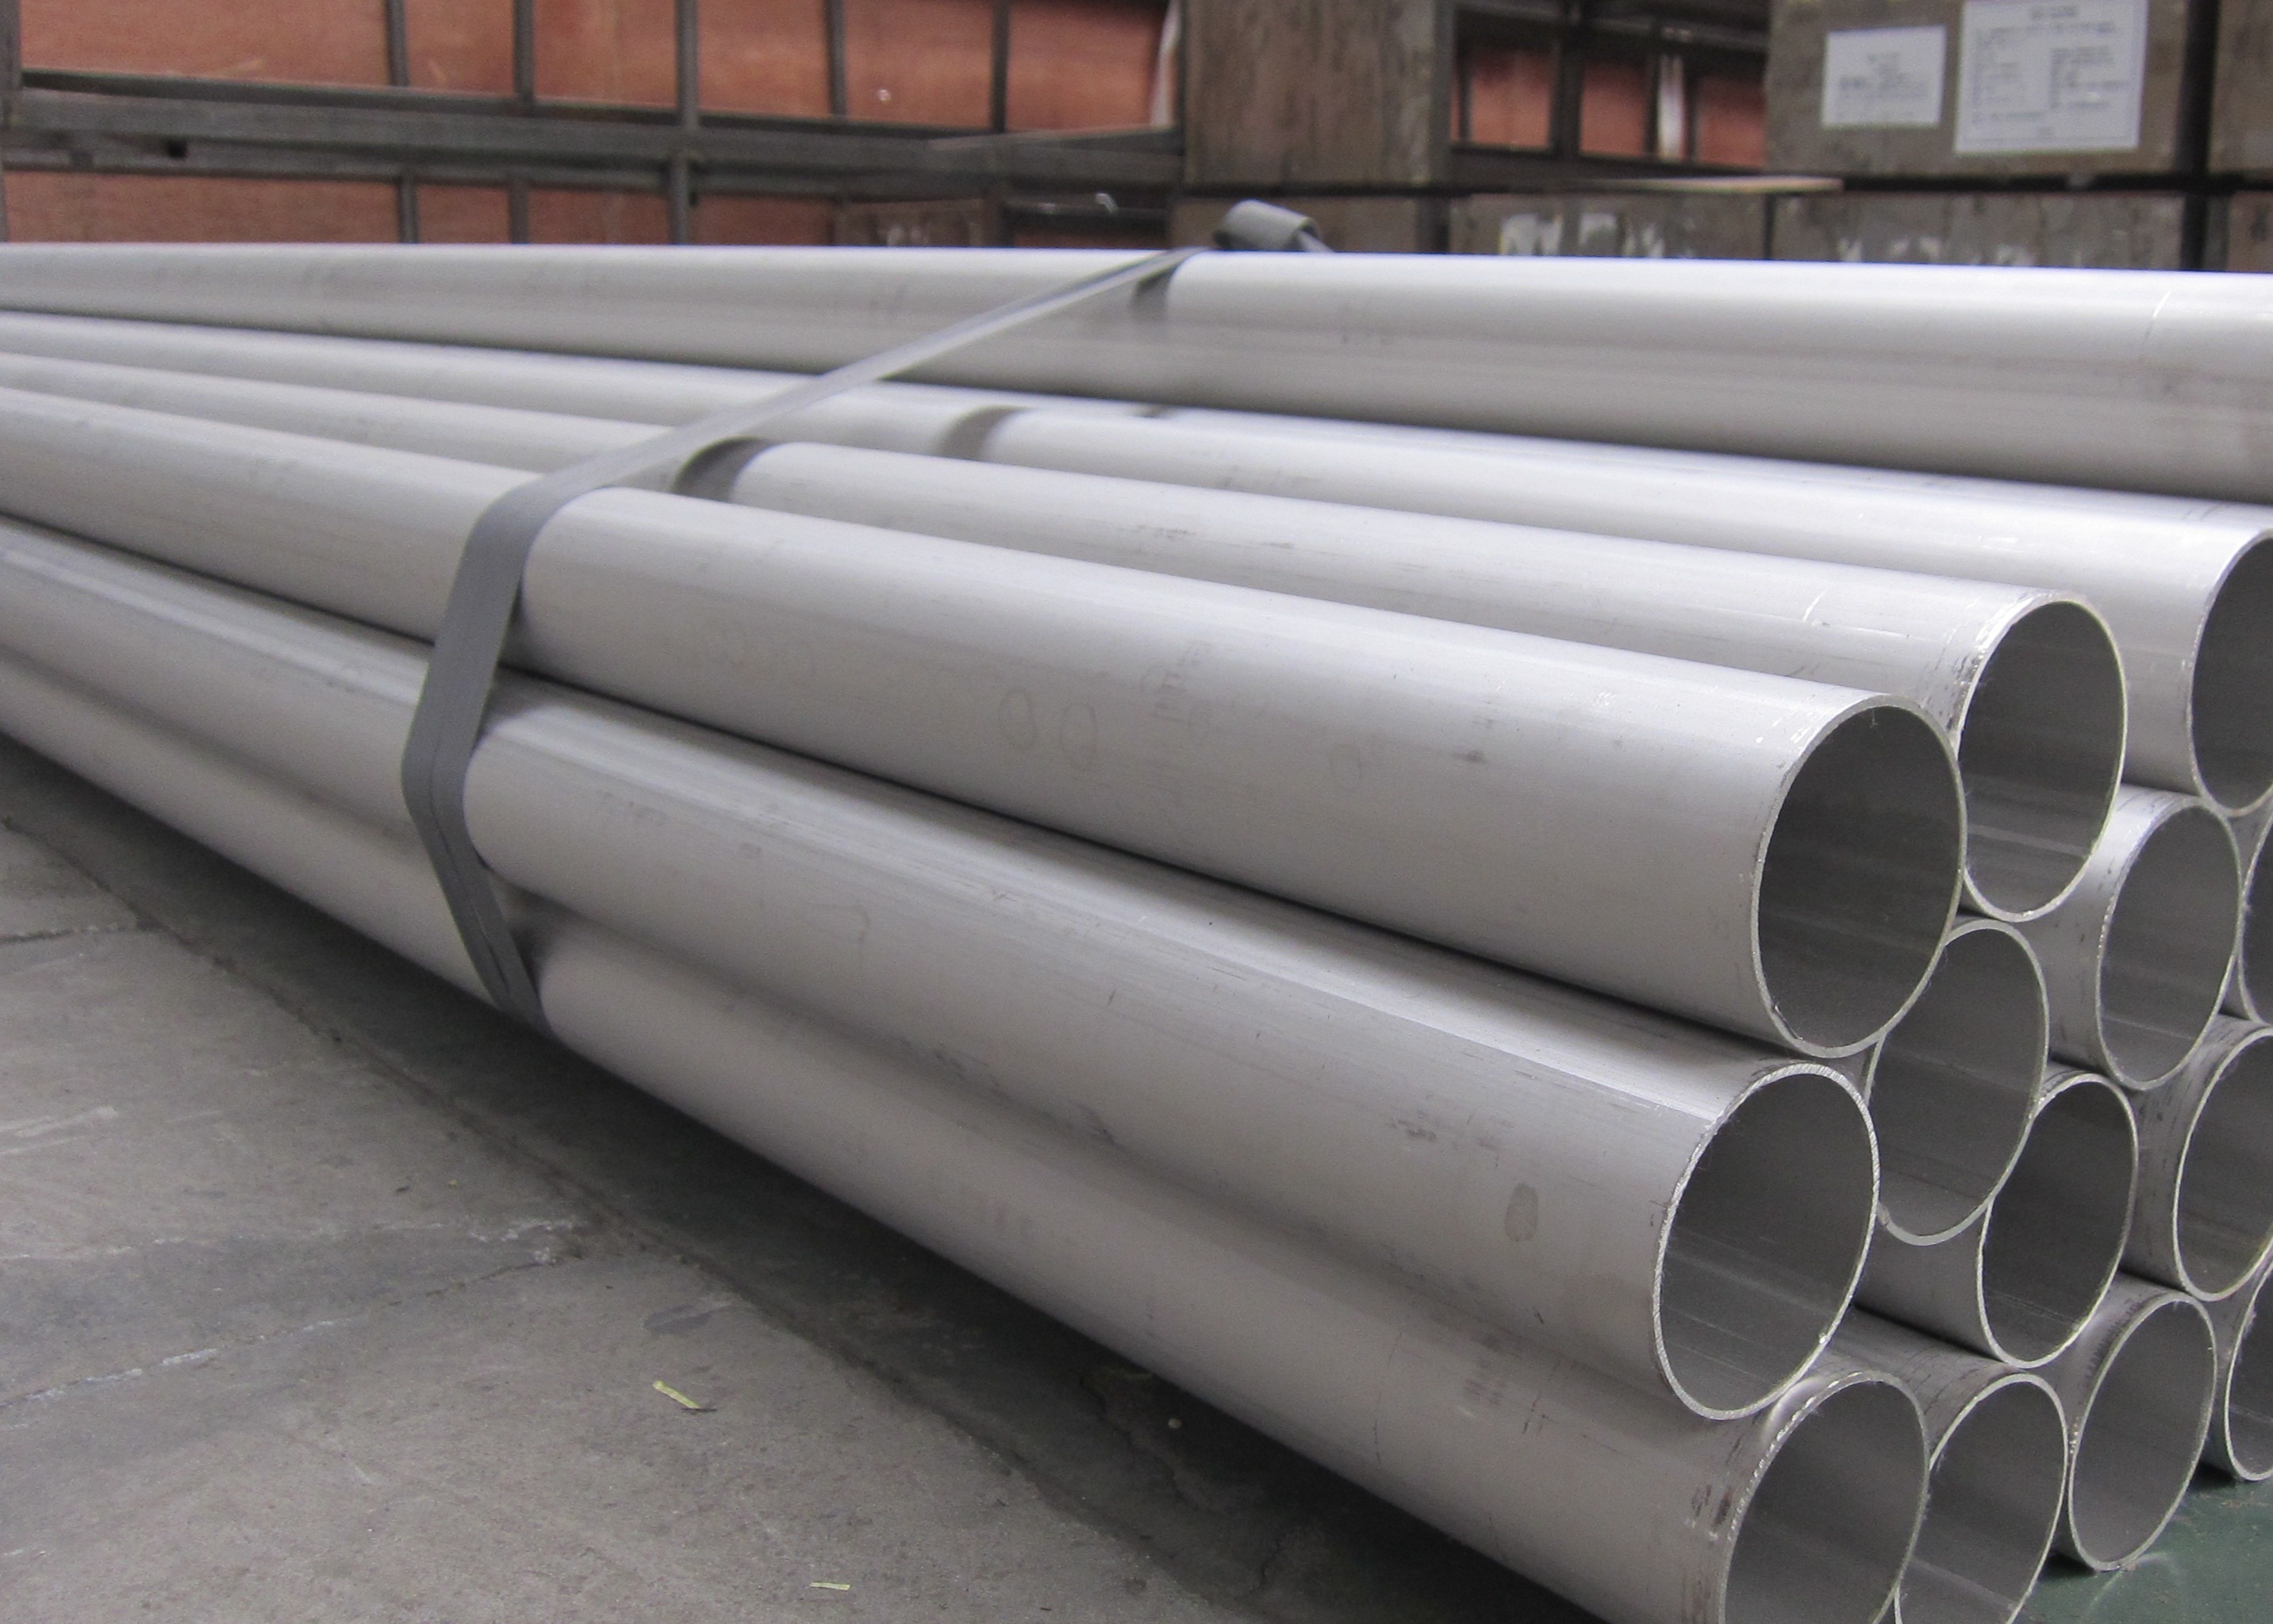 China ASTM A790 S31803 SCH10 Stainless Steel Welded Pipes TP304,TP304L,TP304H,TP321,TP316L,SUS304,SUS304L,SUH304H,SUS321,SUS31 wholesale